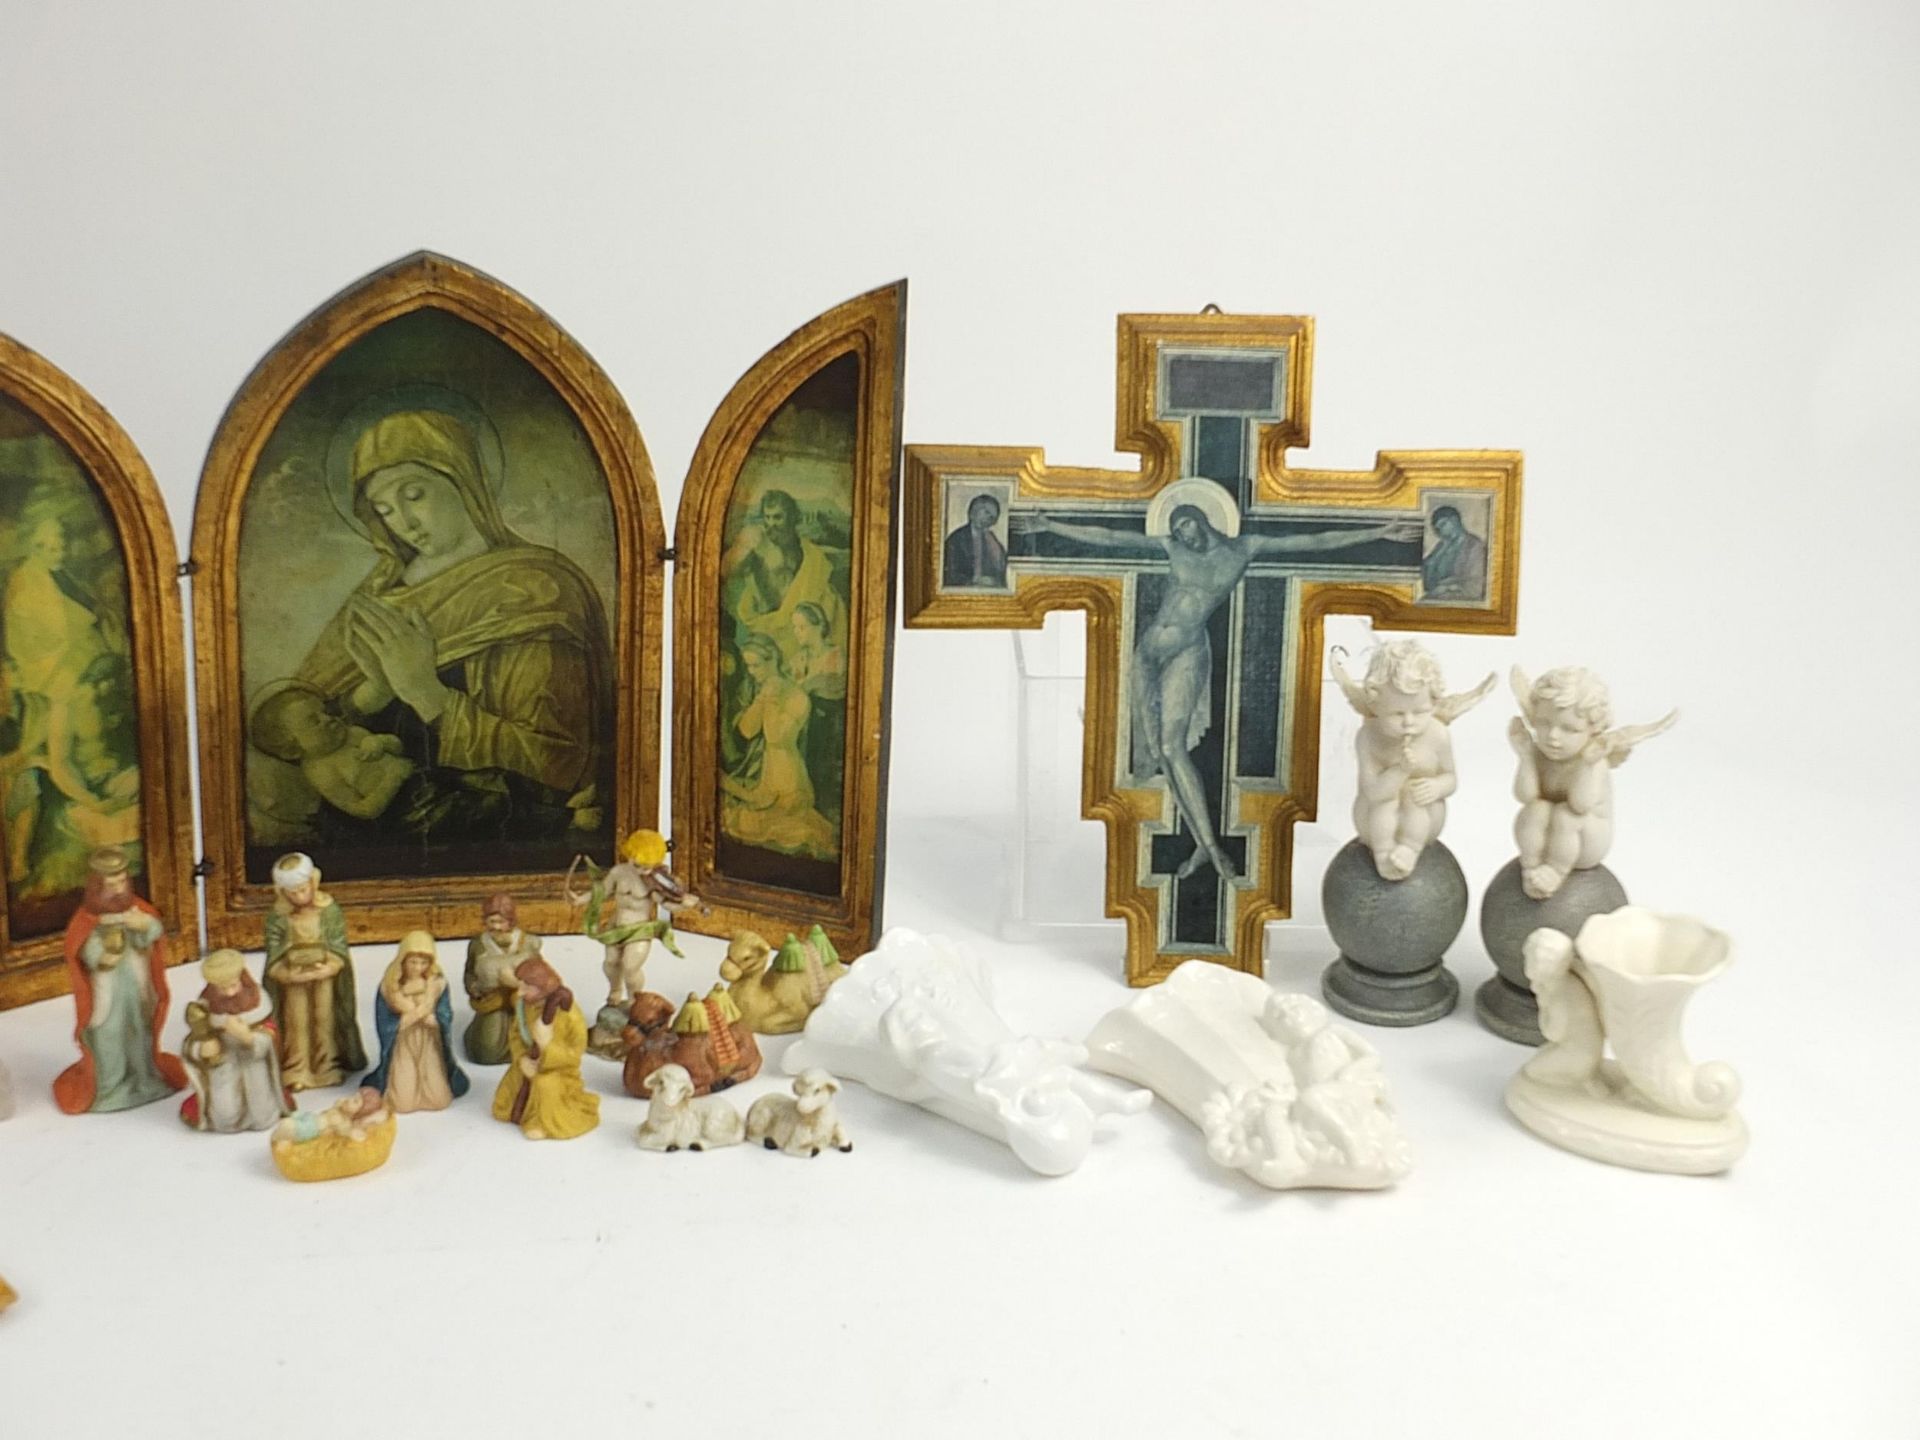 Religious items including ceramic nativity scene, angels and wooden ikons, the largest 40cm high - Image 3 of 4